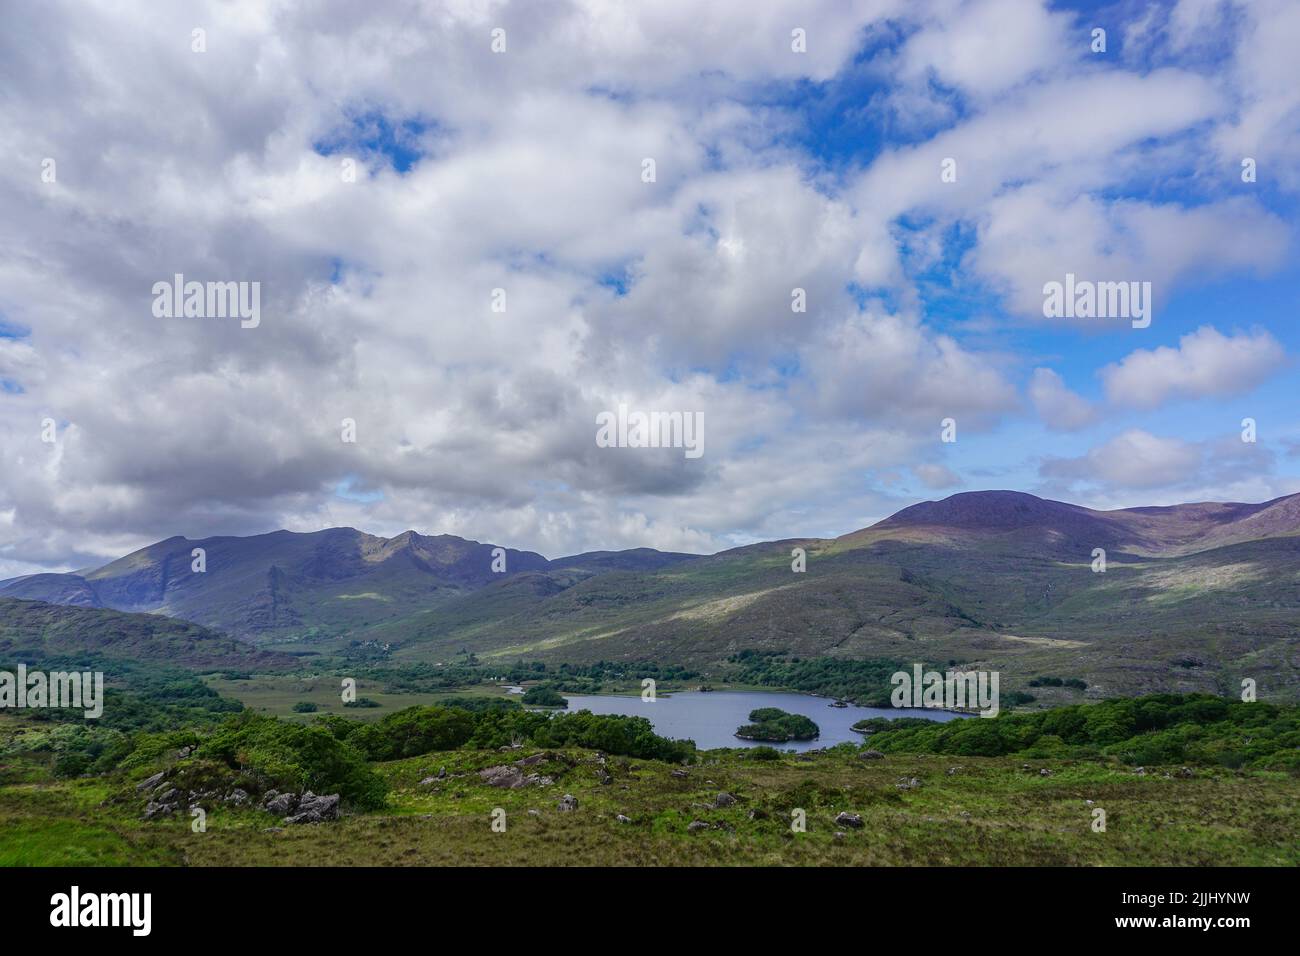 Killarney, Co. Kerry, Ireland: View of the lakes of Killarney from Ladies View, a scenic viewpoint in the Killarney National Park. Stock Photo